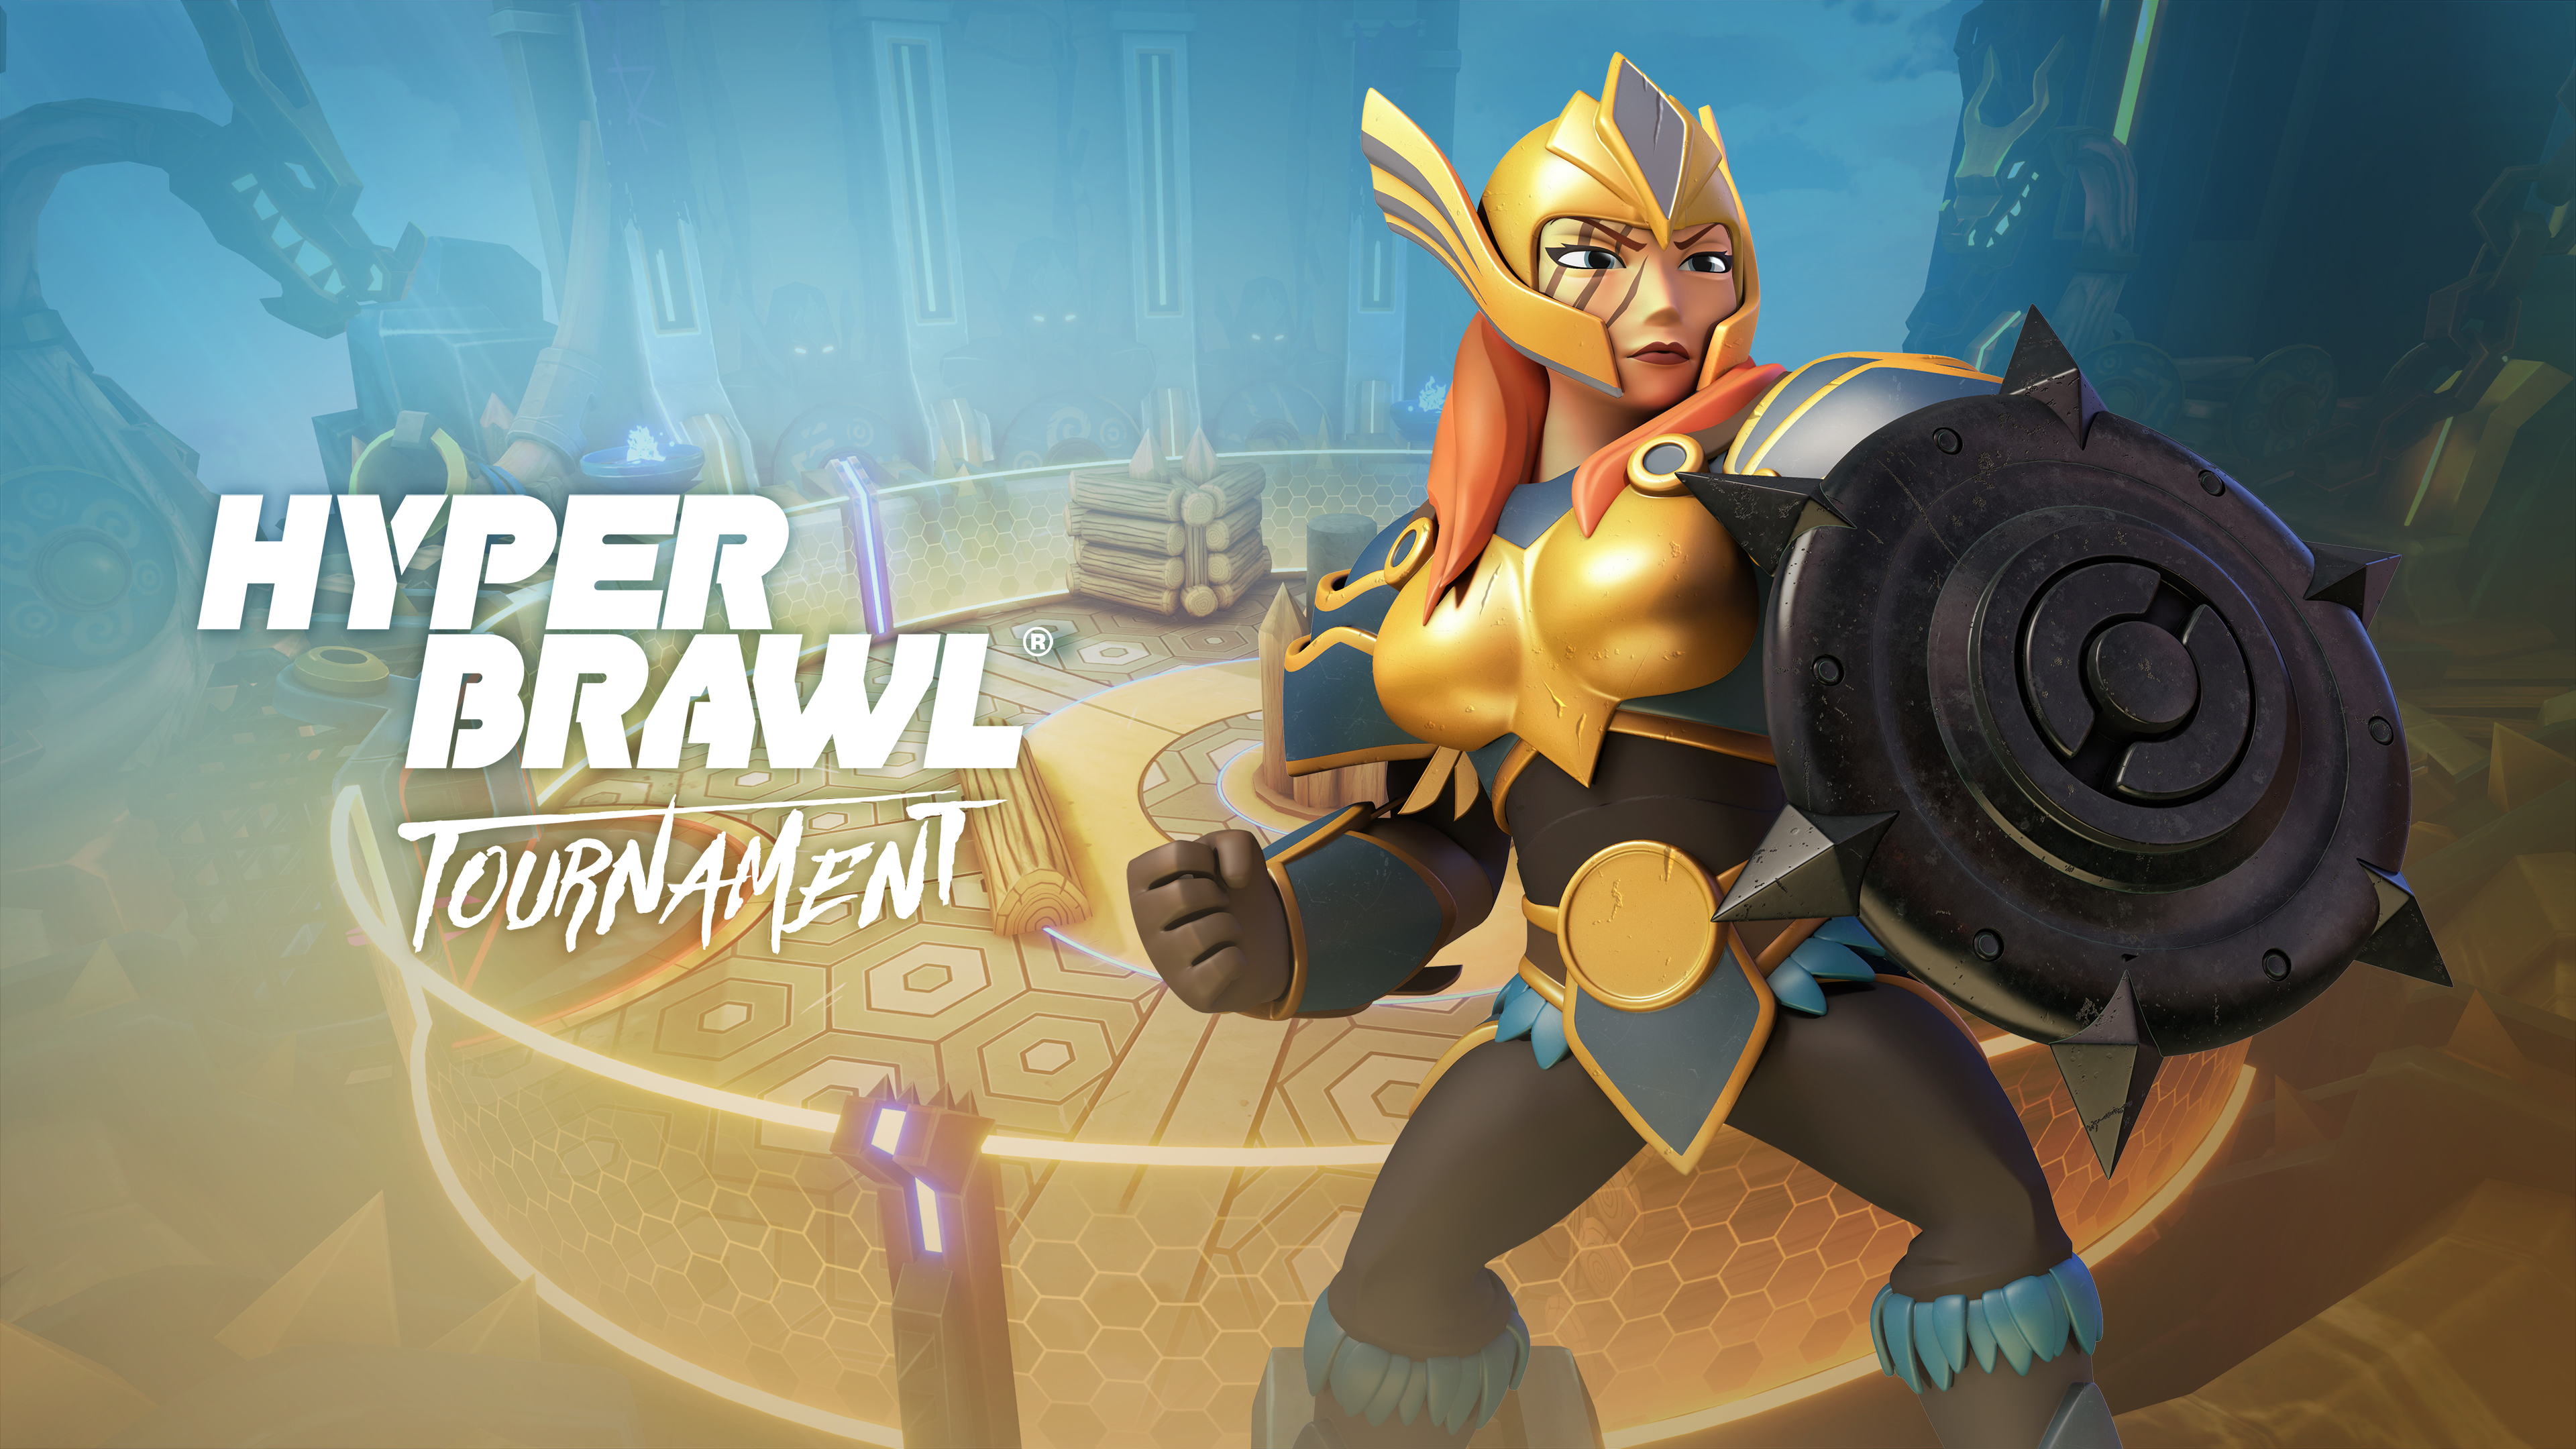 OUT NOW: HyperBrawl Tournament